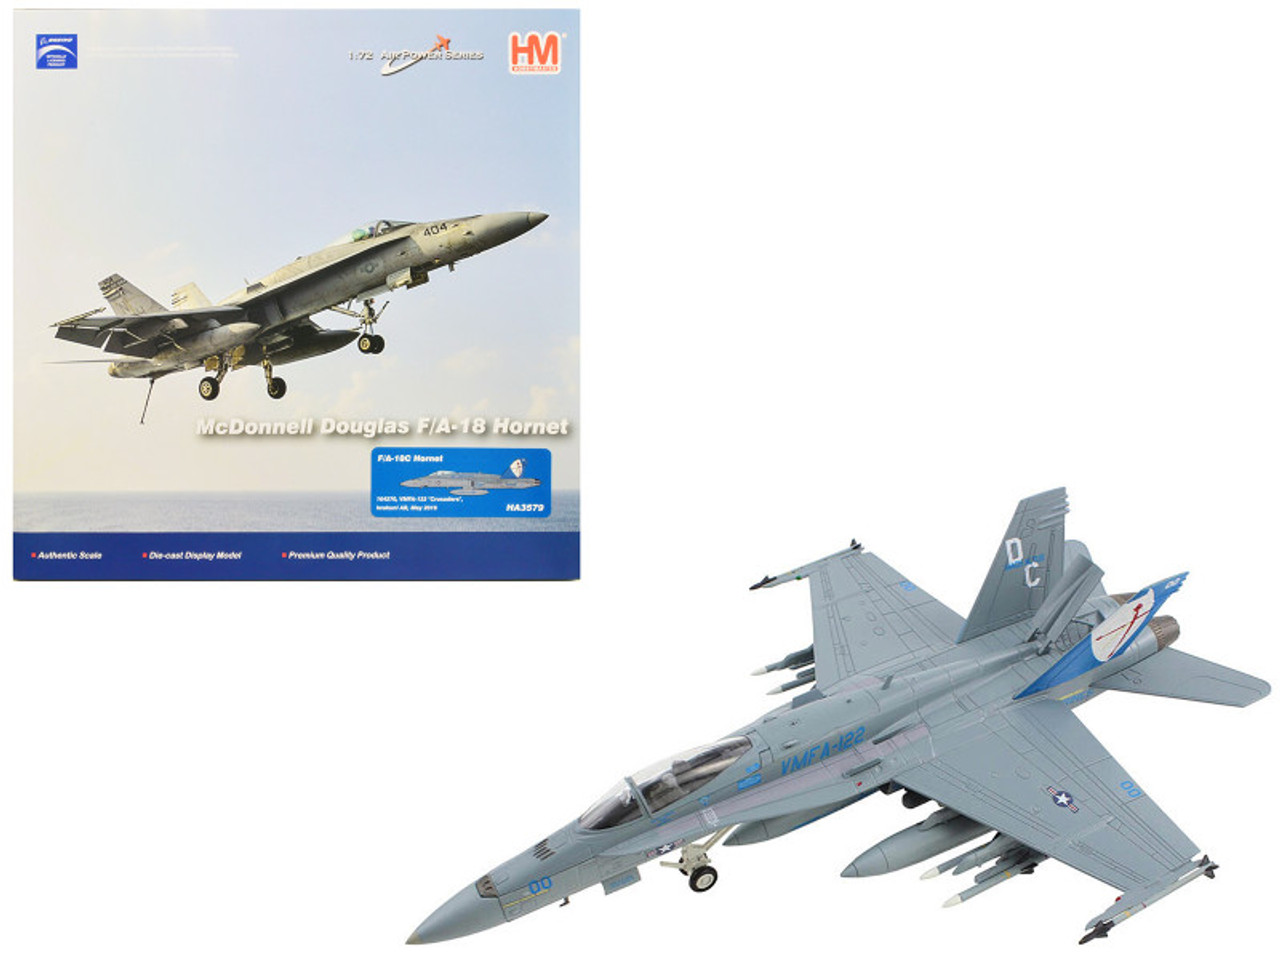 McDonnell Douglas F/A-18D Hornet Aircraft "VMFA-122 Crusaders Iwakuni AB" (2016) United States Marines "Air Power Series" 1/72 Diecast Model by Hobby Master